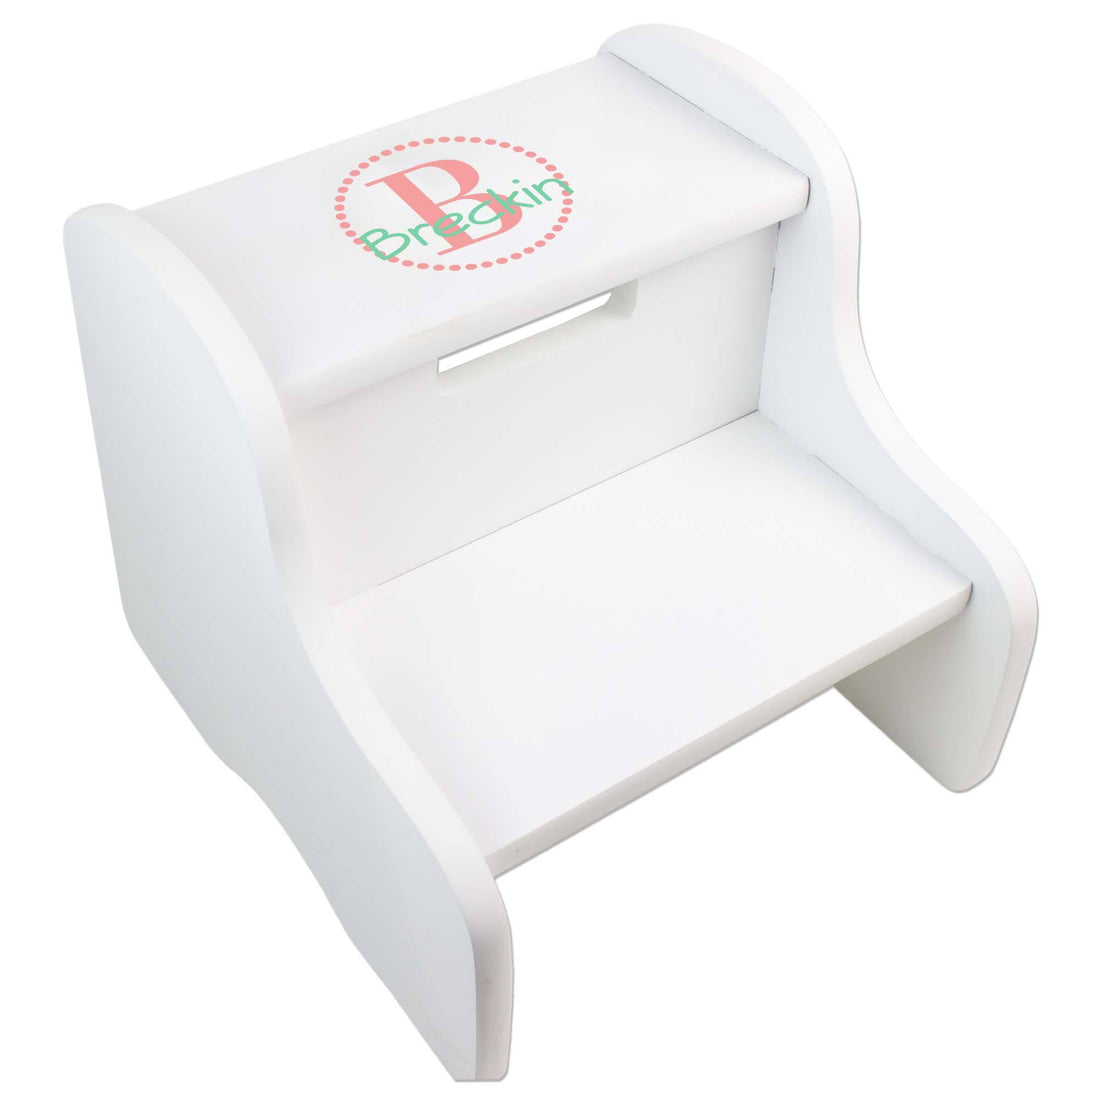 Personalized White Fixed Stool With Coral Circle Design